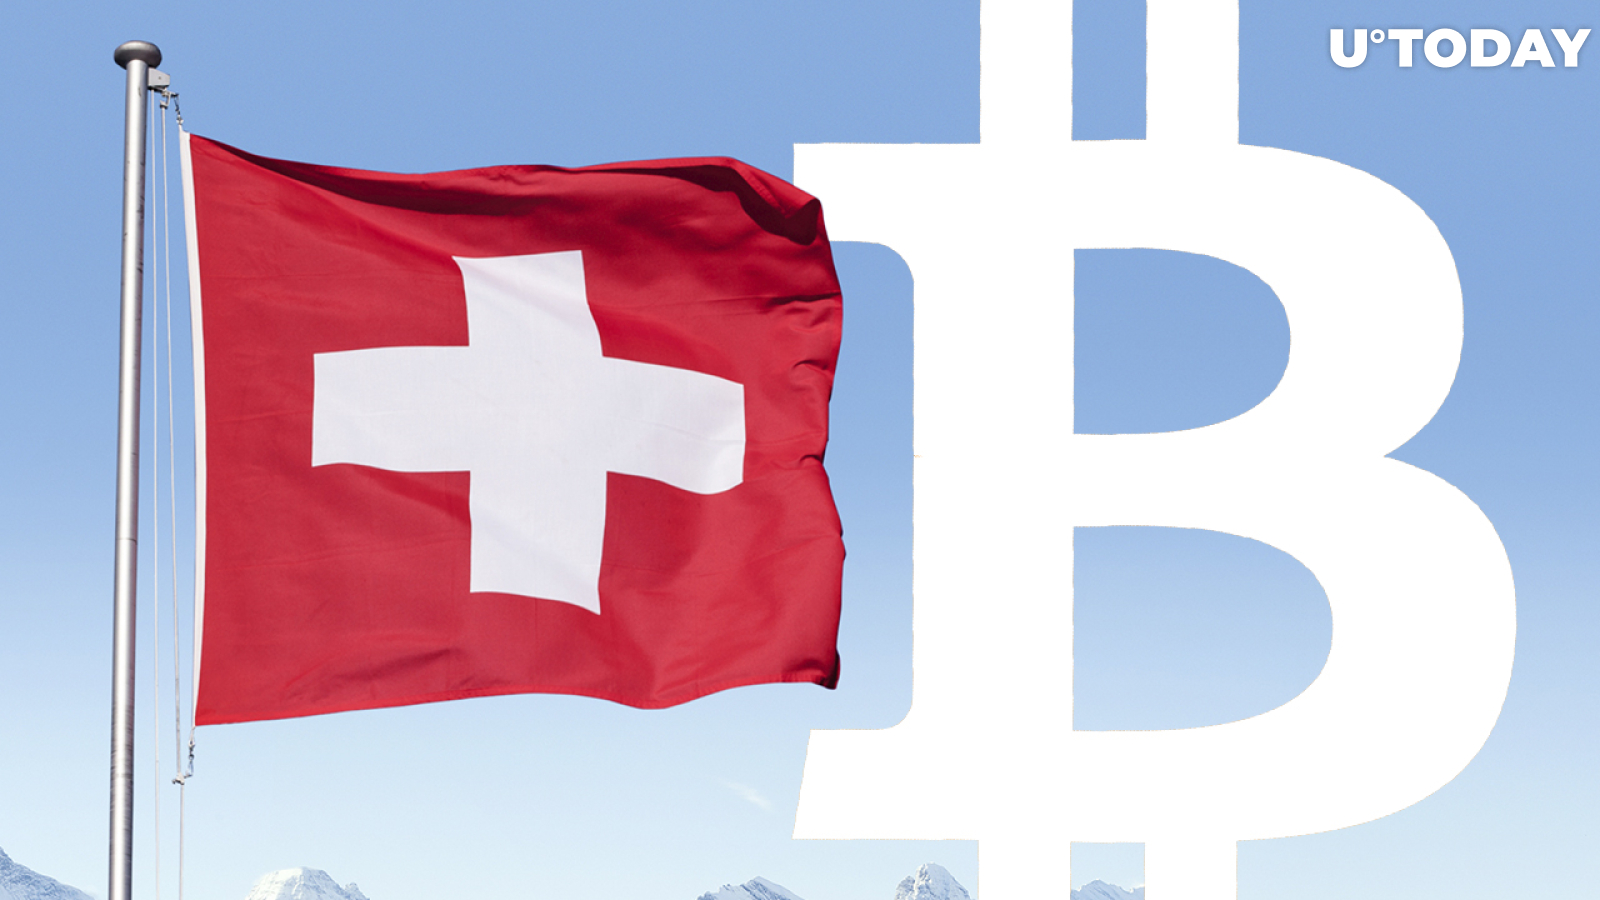 What are the benefits and challenges of holding Bitcoin in a central bank's reserves as discussed by Swiss Bitcoin advocates and the Swiss National Bank Chair?